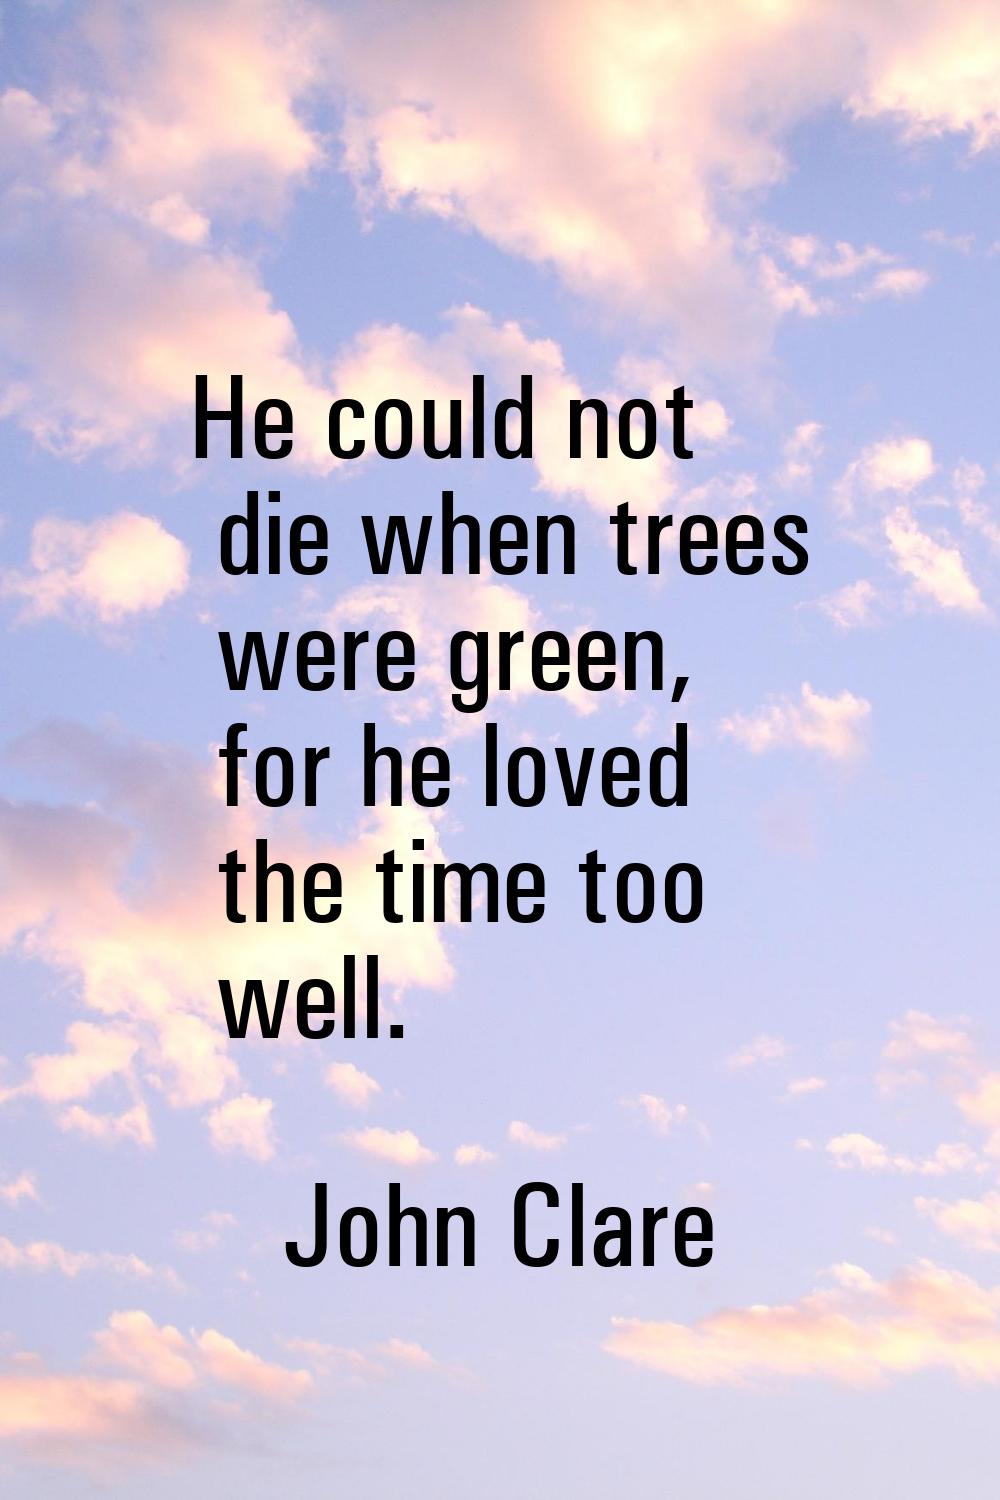 He could not die when trees were green, for he loved the time too well.